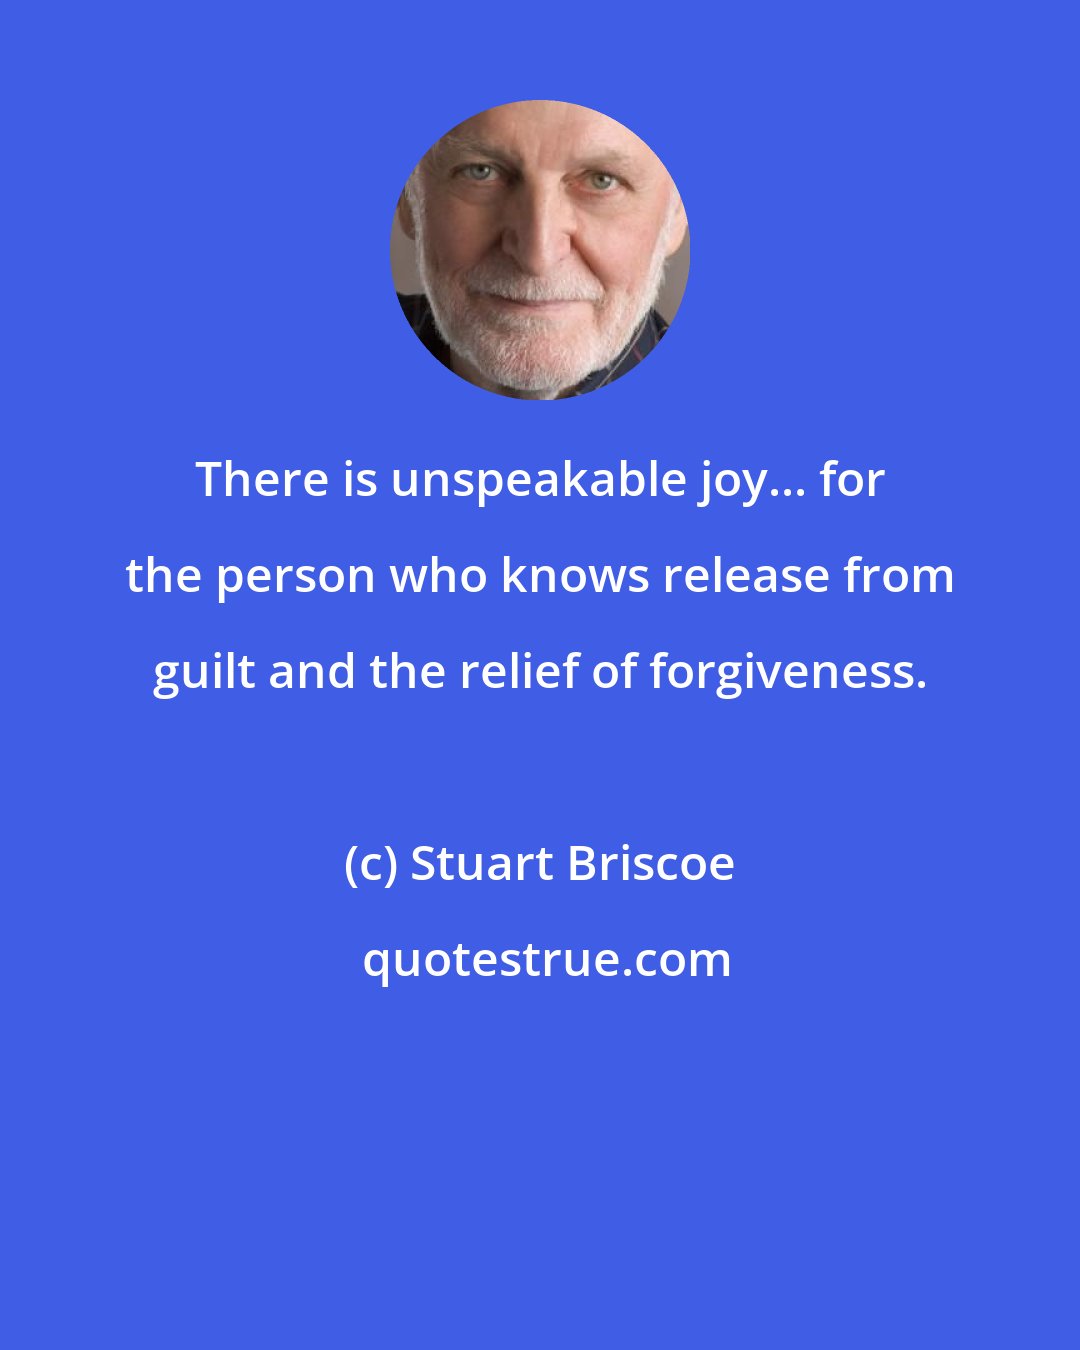 Stuart Briscoe: There is unspeakable joy... for the person who knows release from guilt and the relief of forgiveness.